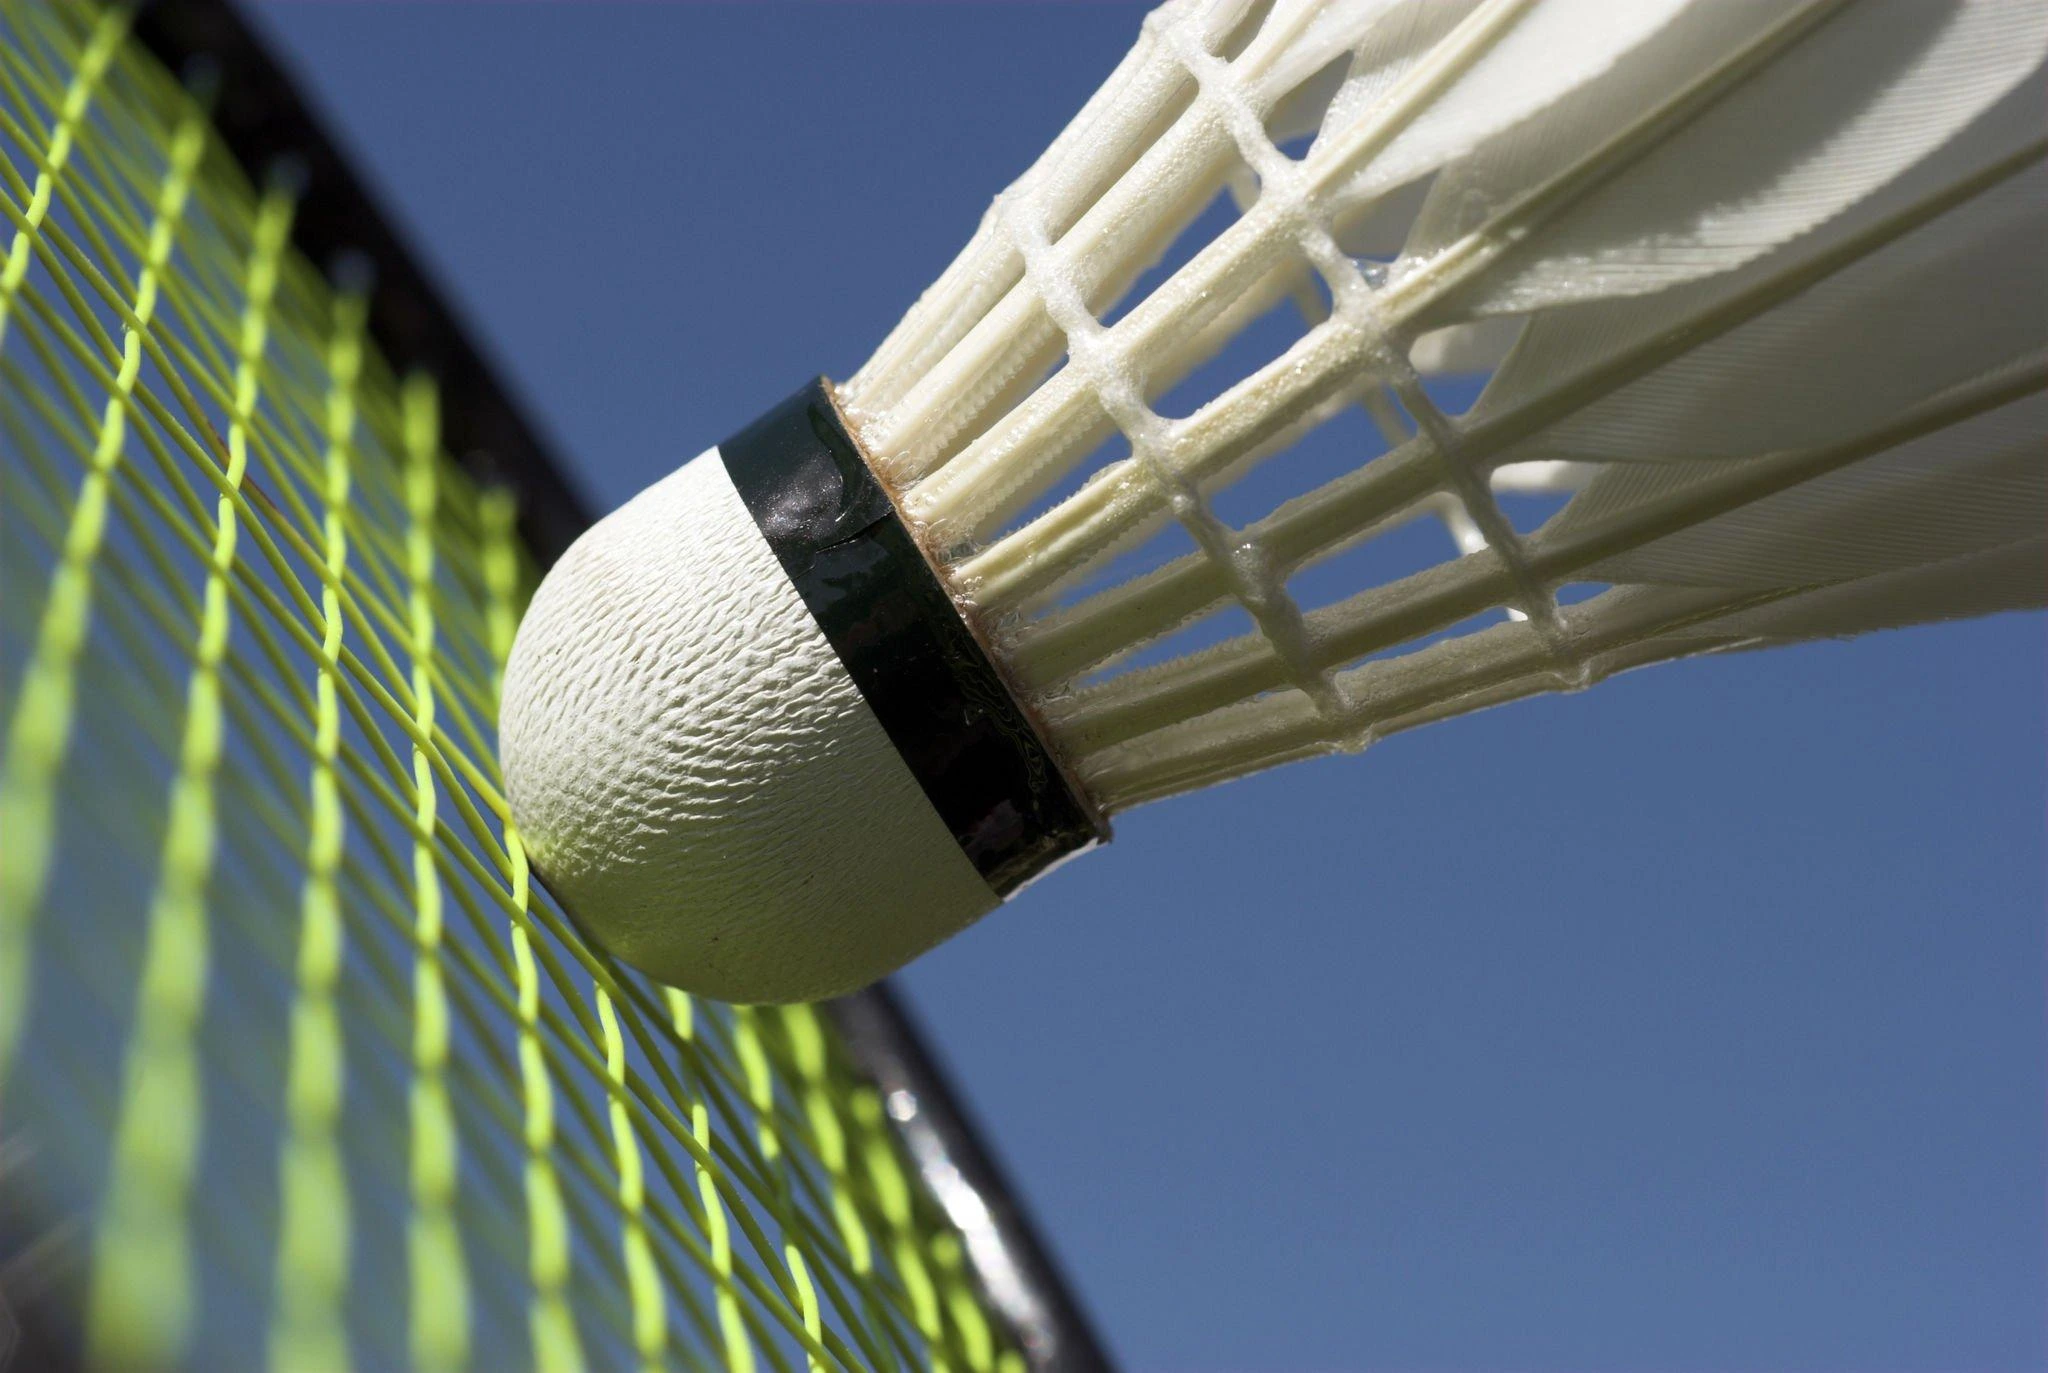 choose your badminton court in dubai at engagesports. Looking to play badminton outdoors in Dubai? Check out our guide to the best locations, court types, and weather conditions for the game.